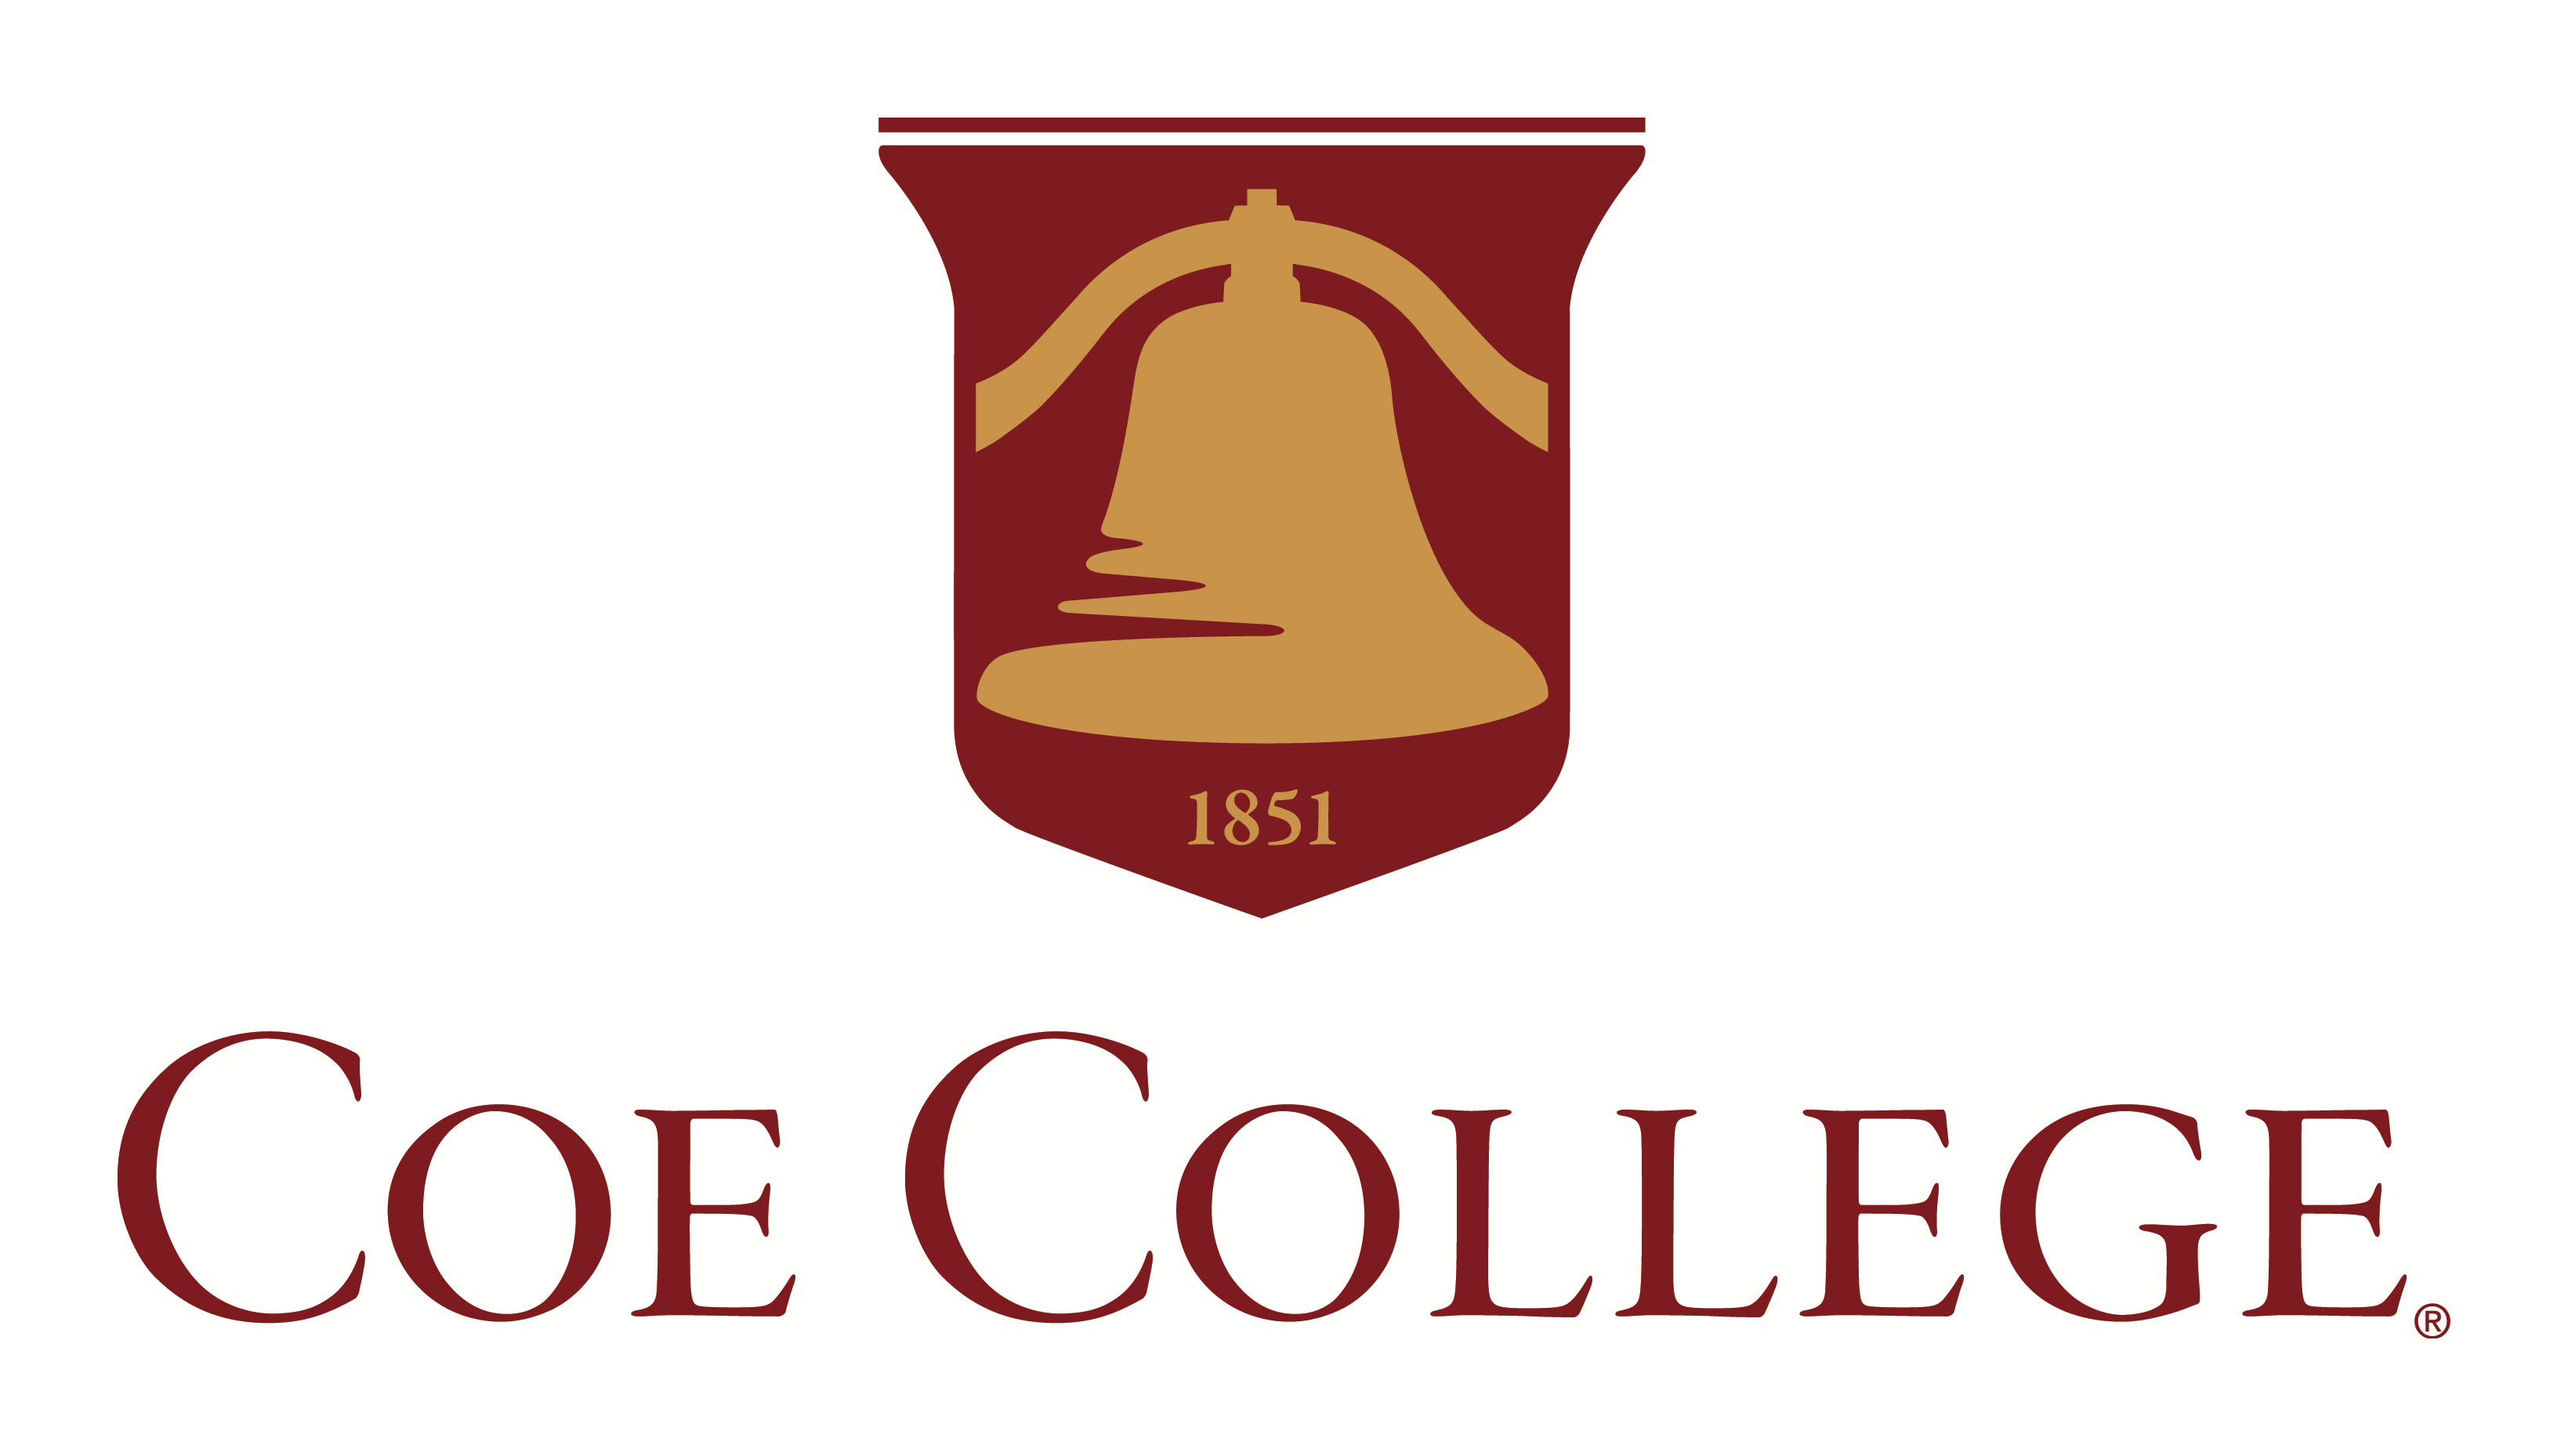 Callisto is an official partner of Coe College